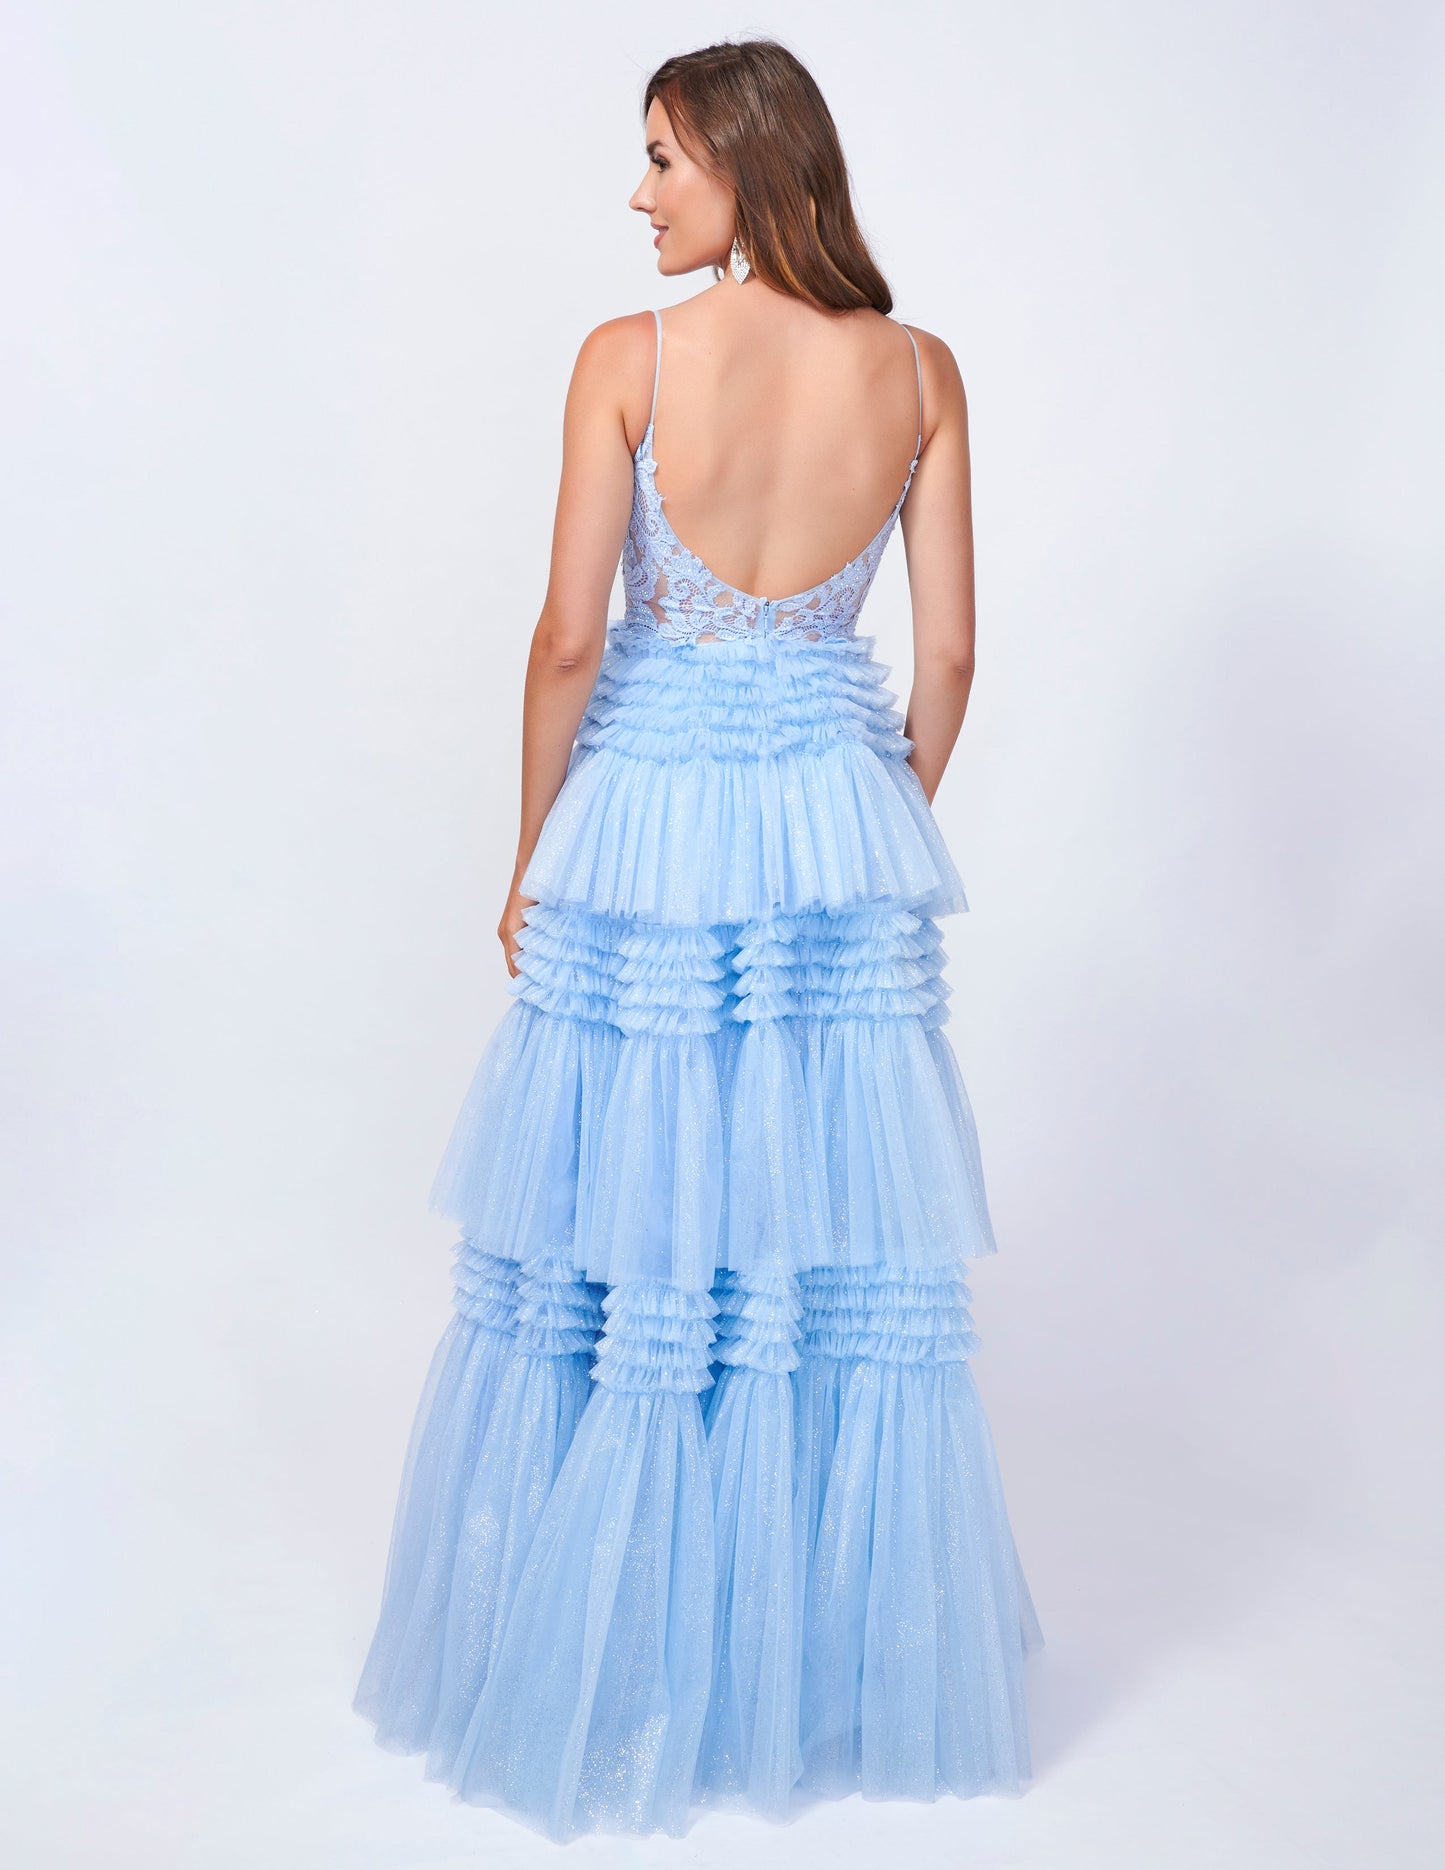 Elevate your prom night with the Nina Canacci 4418 Sheer Lace Corset Prom Dress. Its layered A-line design, shimmering tulle fabric, and delicate lace corset create a stunning, formal ball gown silhouette. Enjoy the perfect blend of elegance and glamour with this timeless dress.